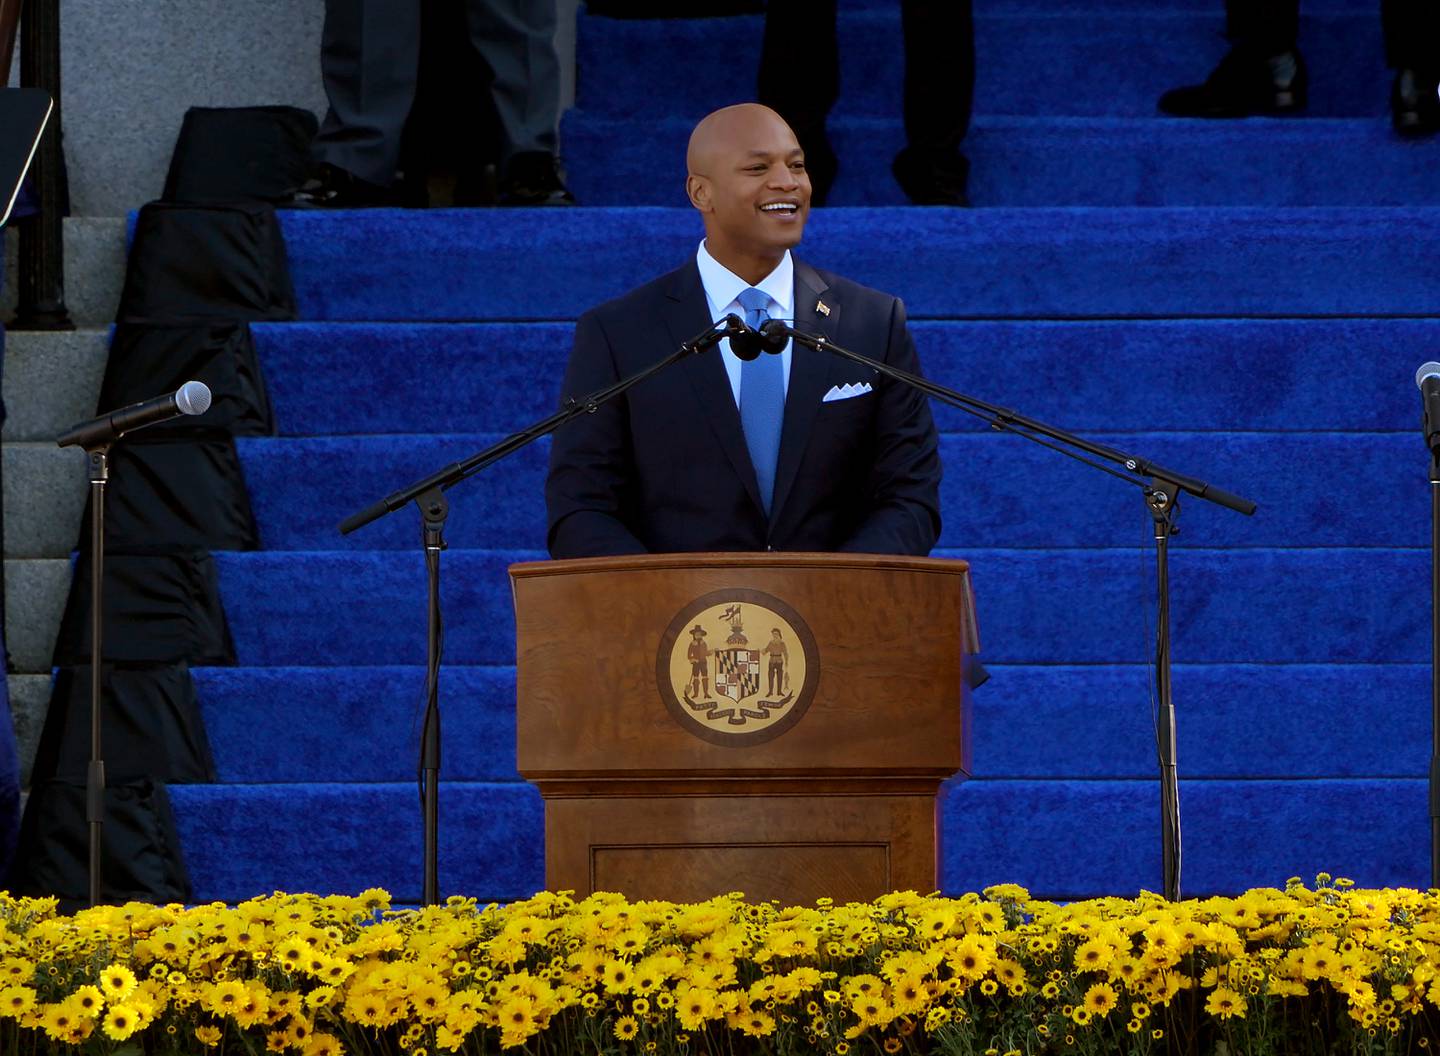 Gov. Wes Moore speaks after being sworn into office by Chief Justice Matthew Fader during his inauguration as the First African-American governor for the State of Maryland, at the Maryland State House, in Annapolis, MD, Wednesday, January 18, 2023.